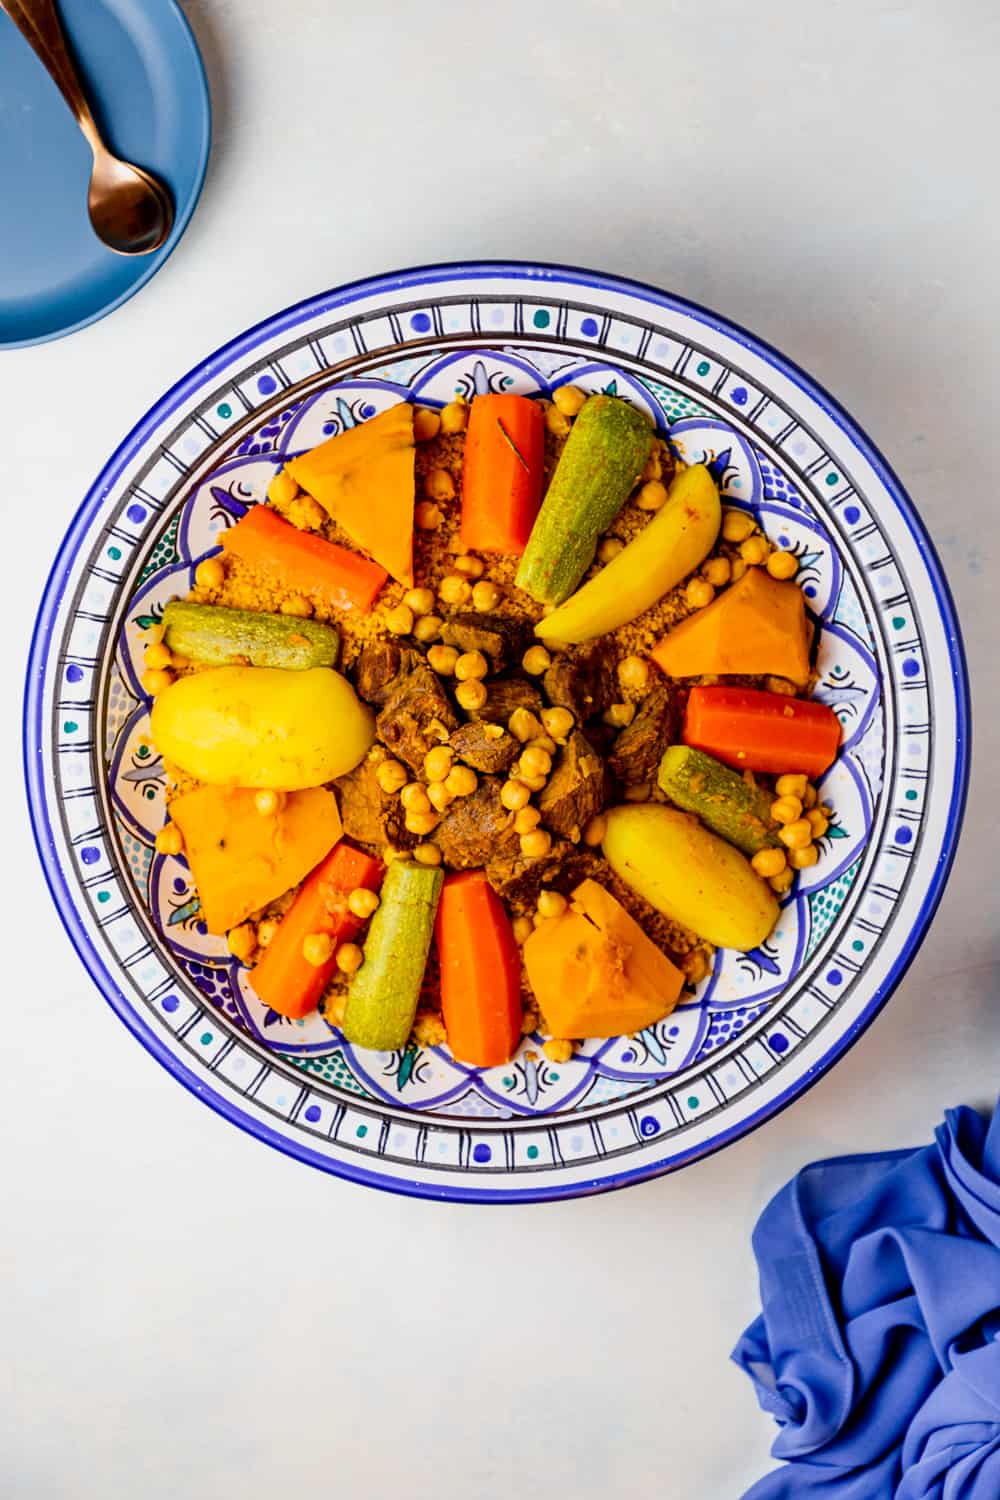 tunisian couscous in a traditional patterned plate